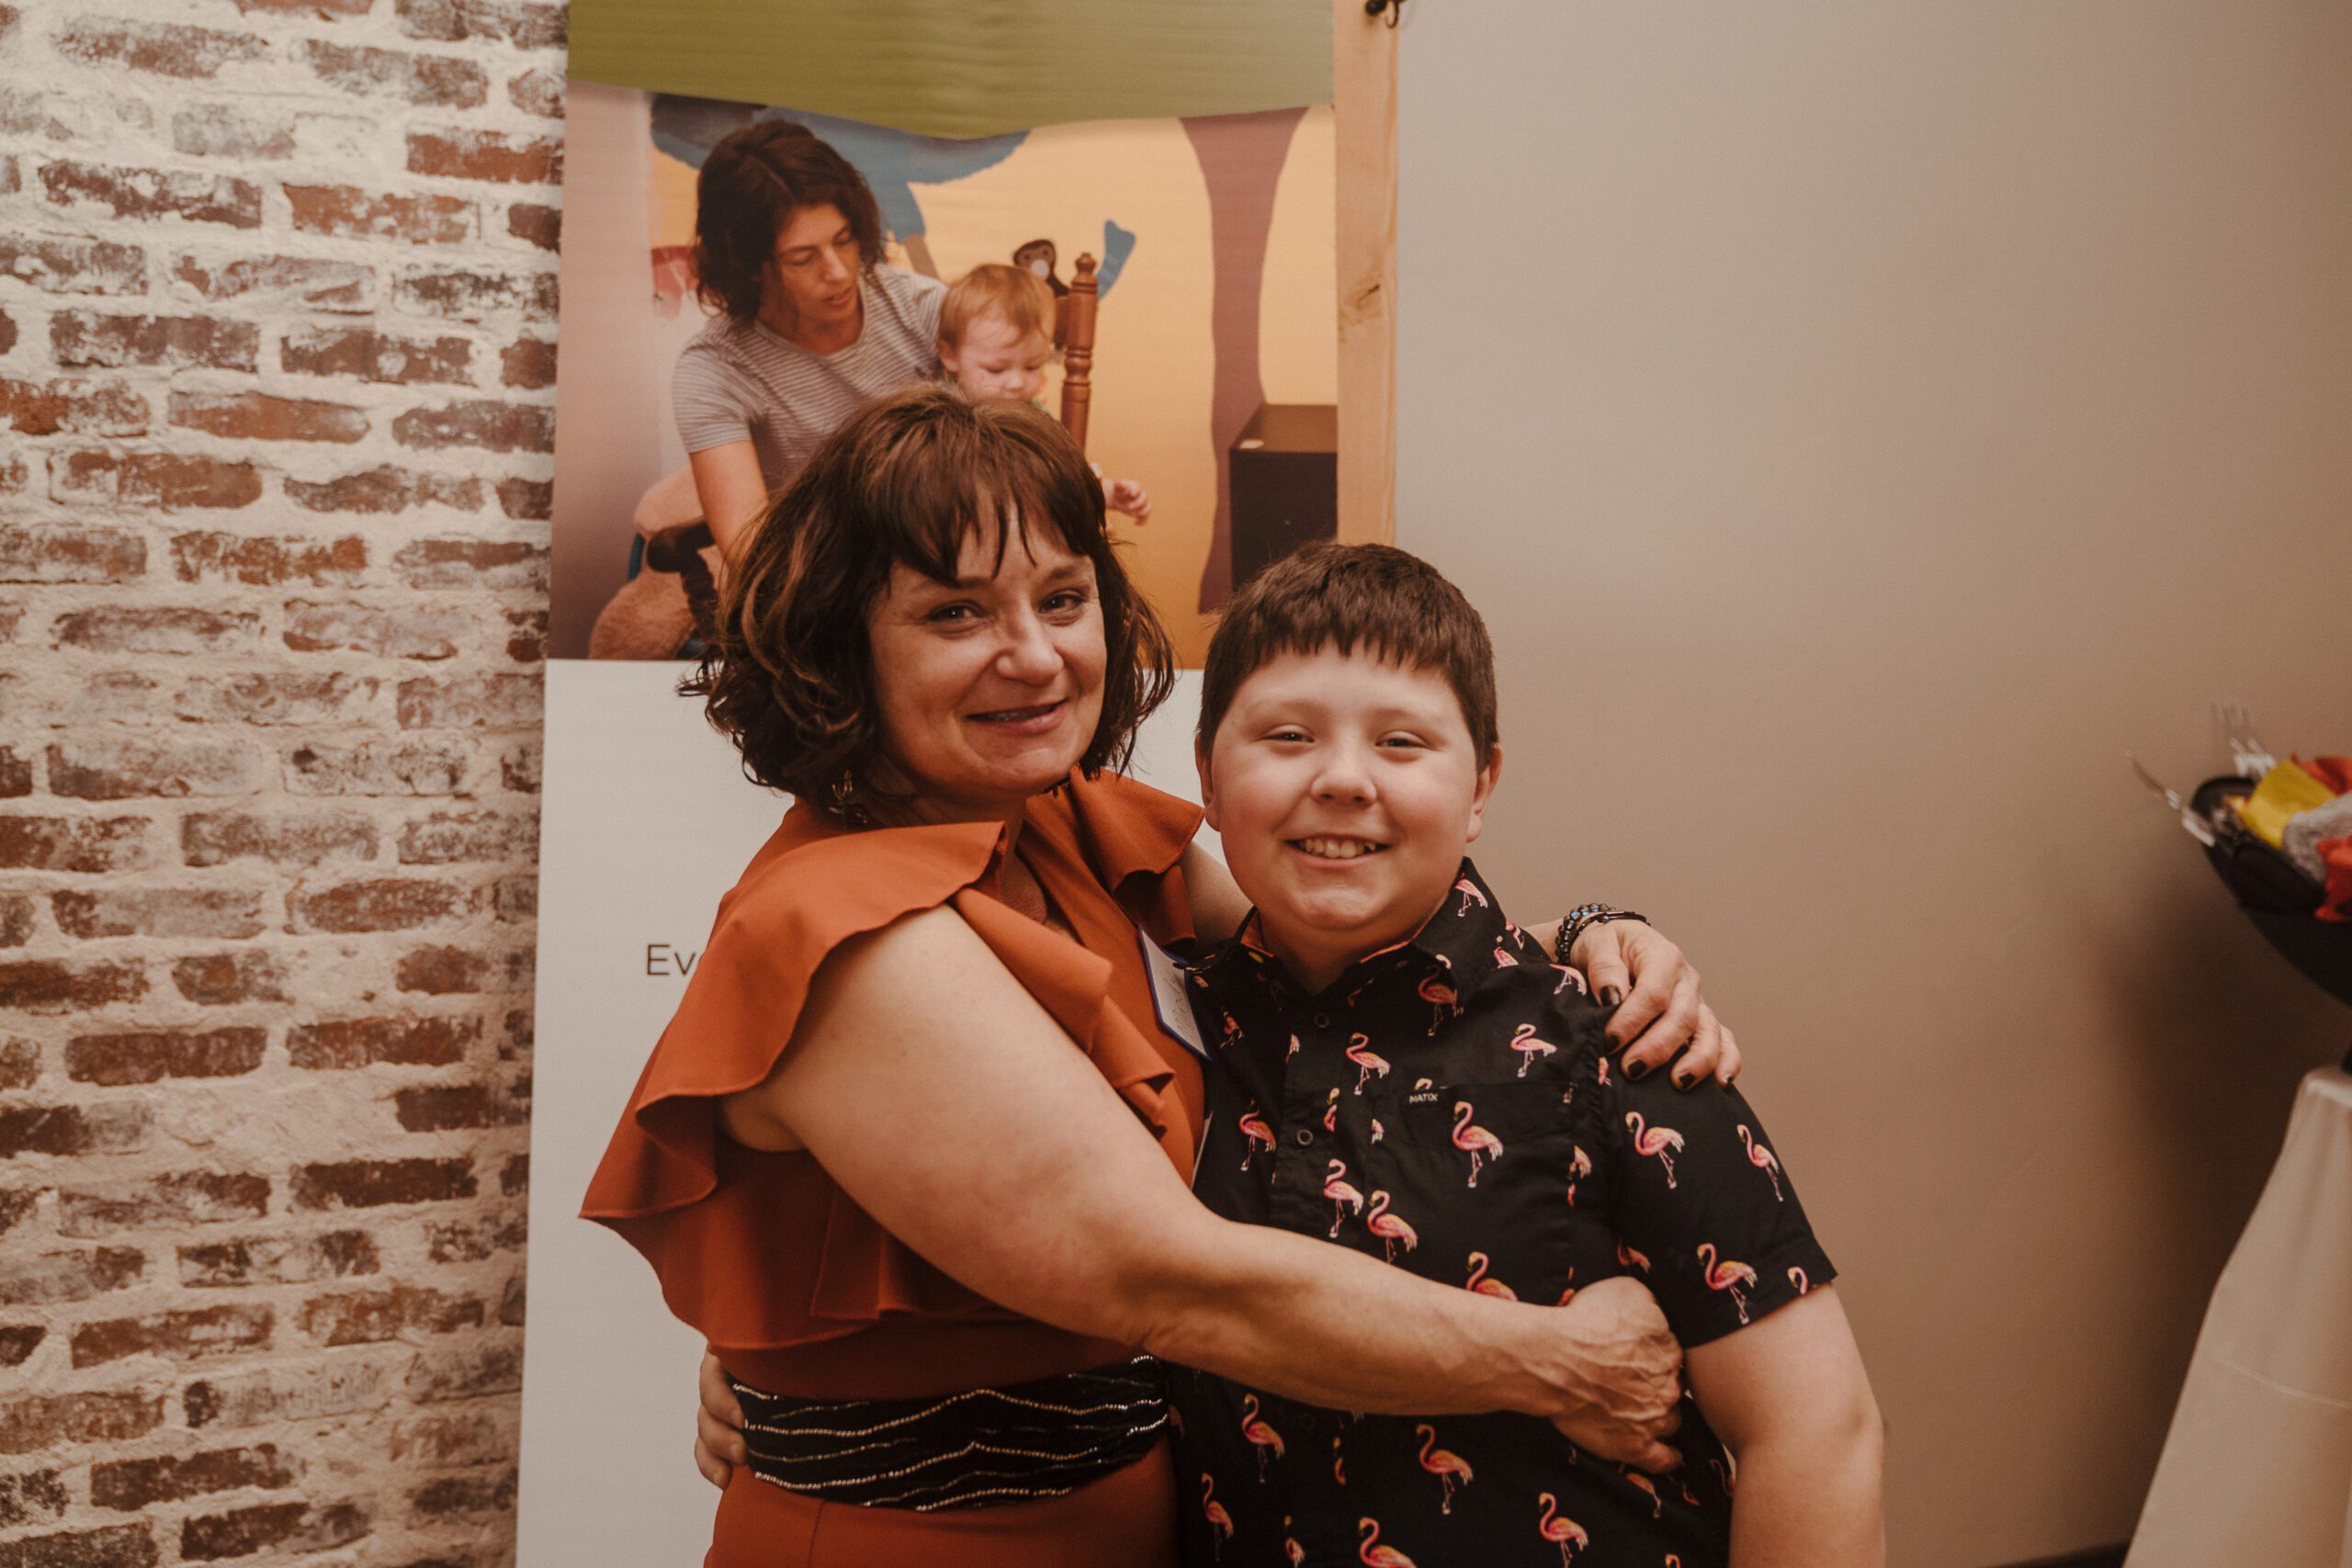 A mother named Mindy and her son, hugging and smiling